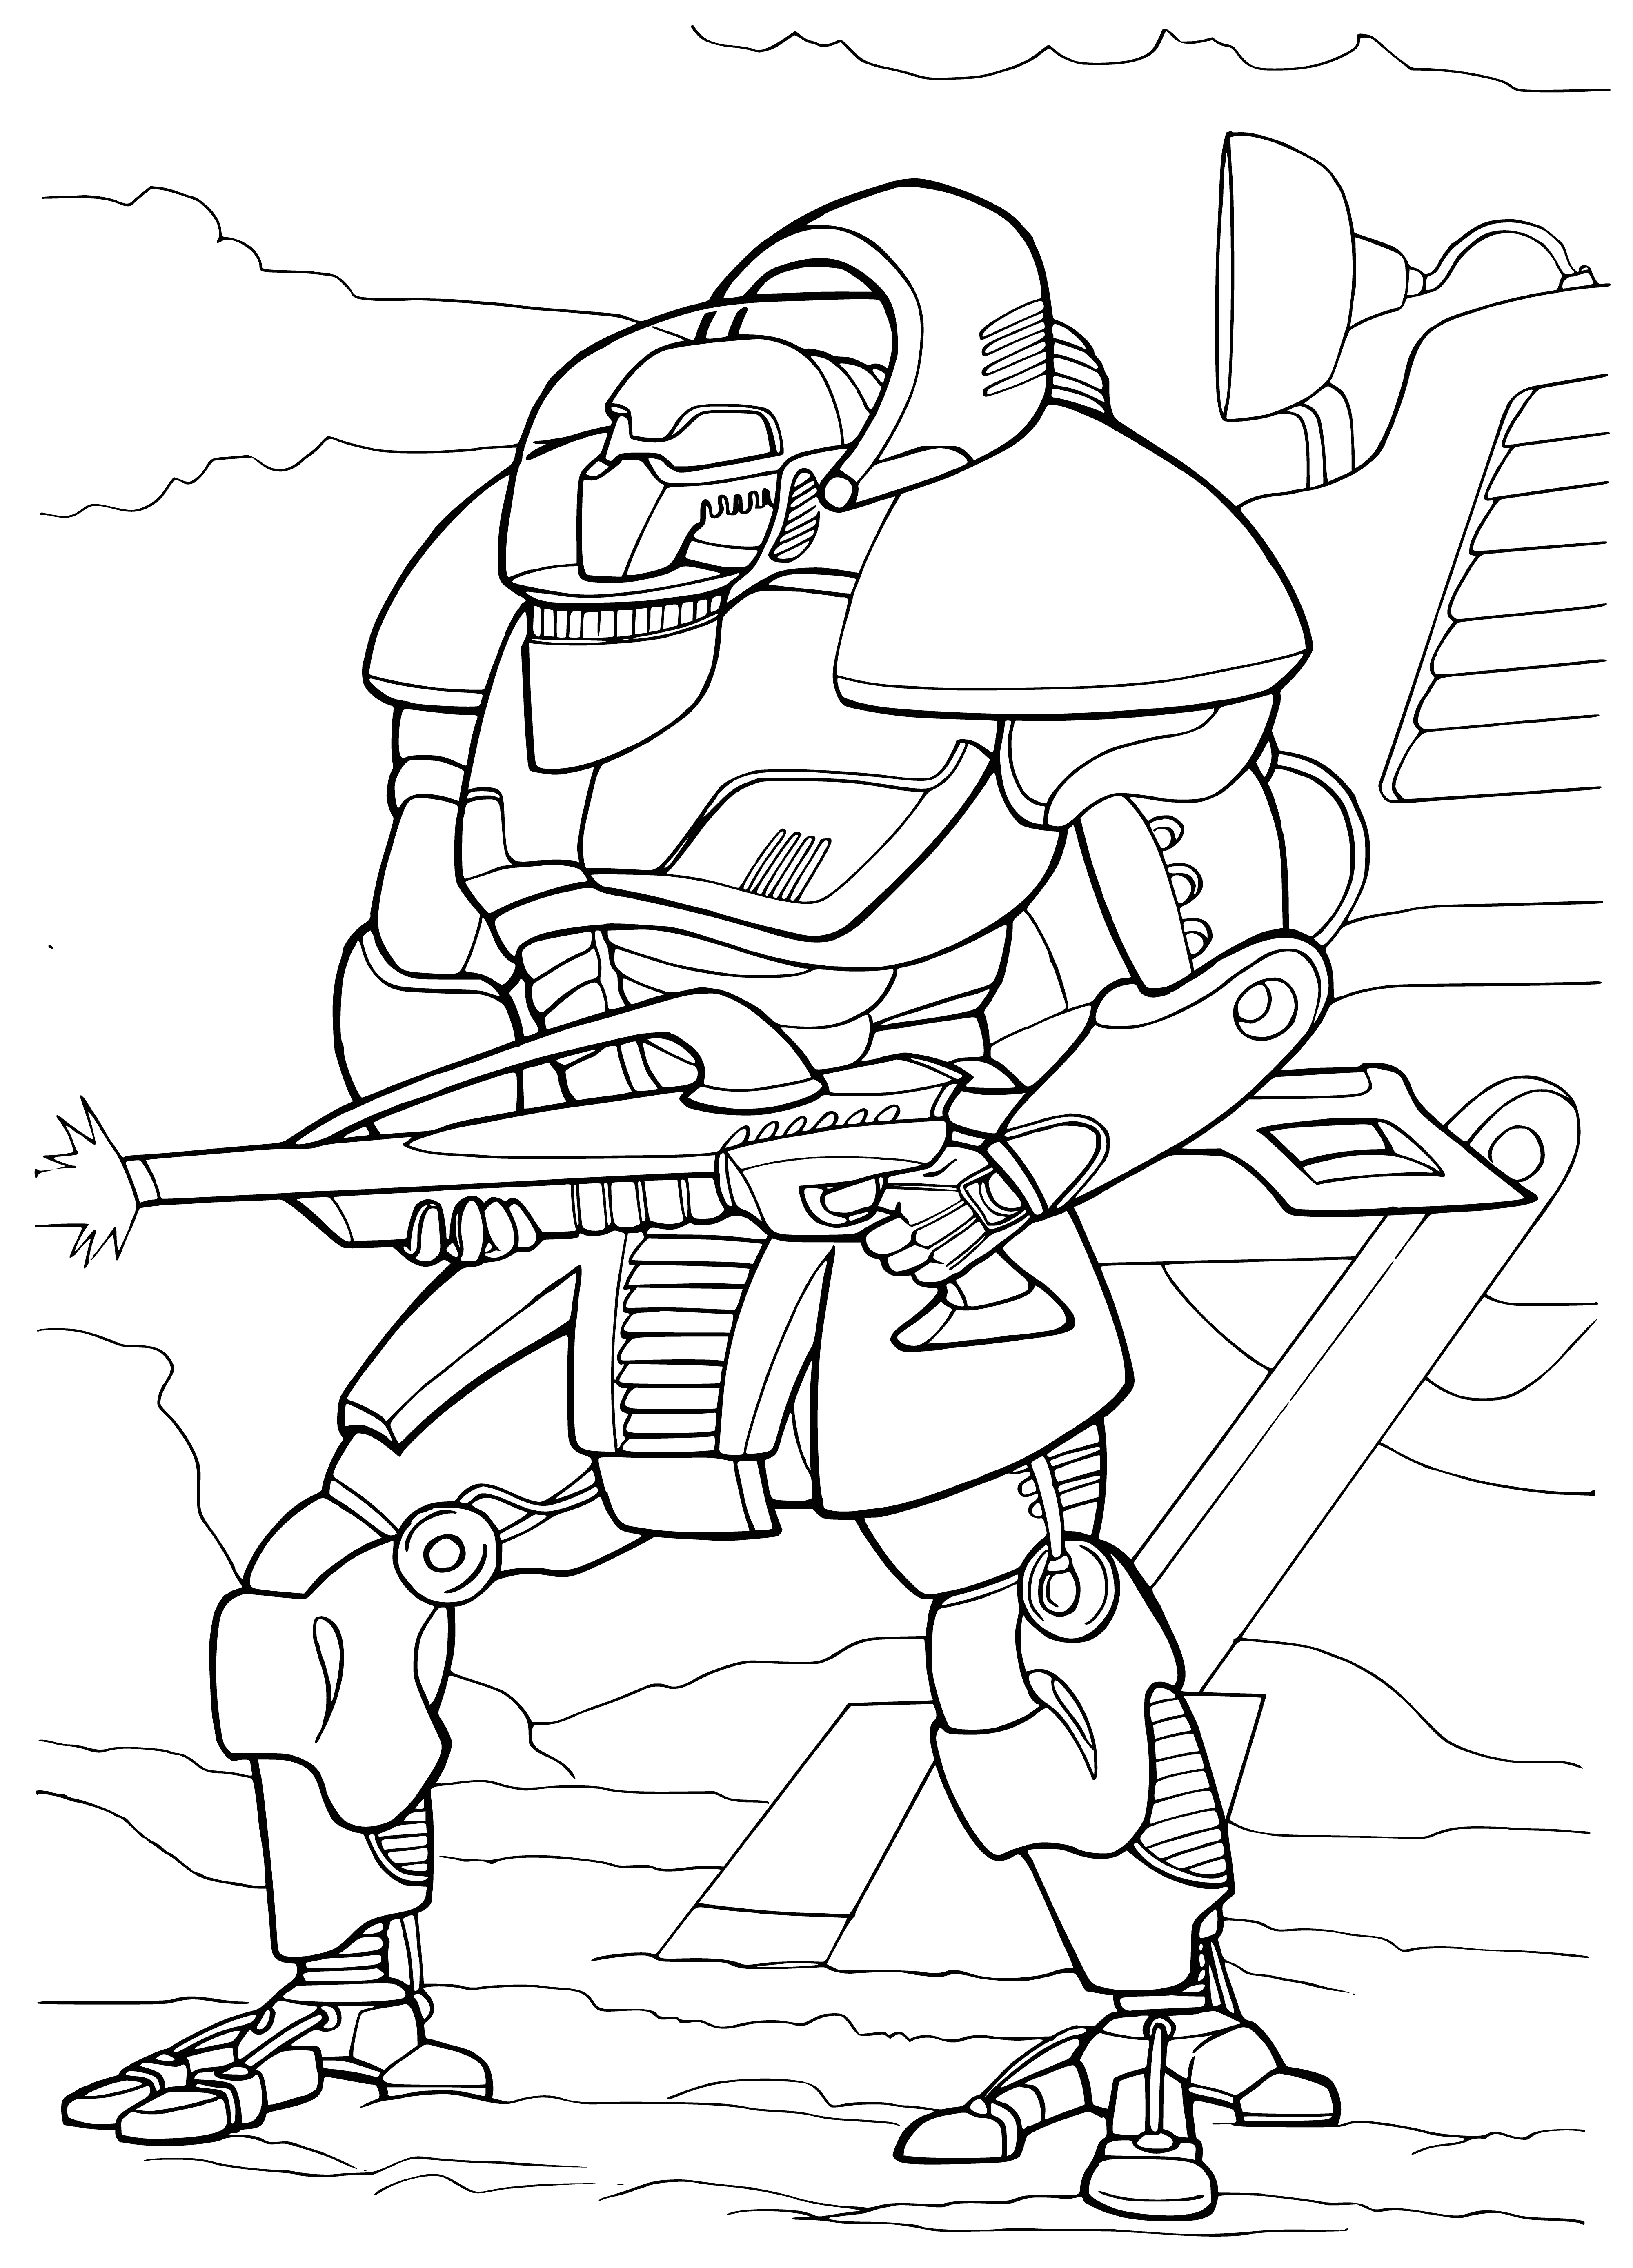 coloring page: Wars in the future between cyborgs. Powerful weapons & armor. Fierce battles. Lots of destruction & bloodshed.